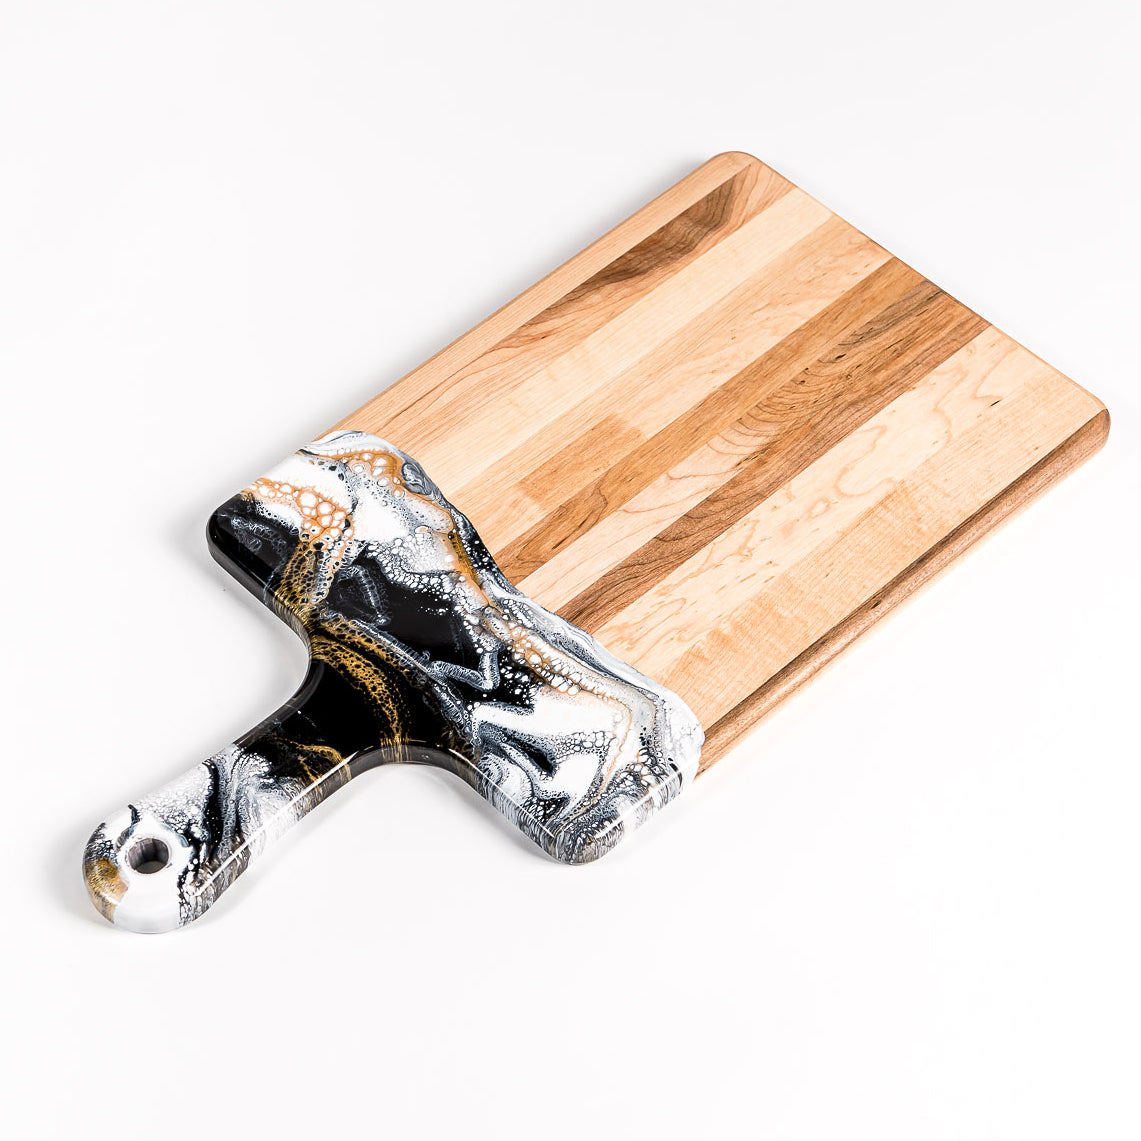 Acacia Resin Cheeseboard in black white and gold.